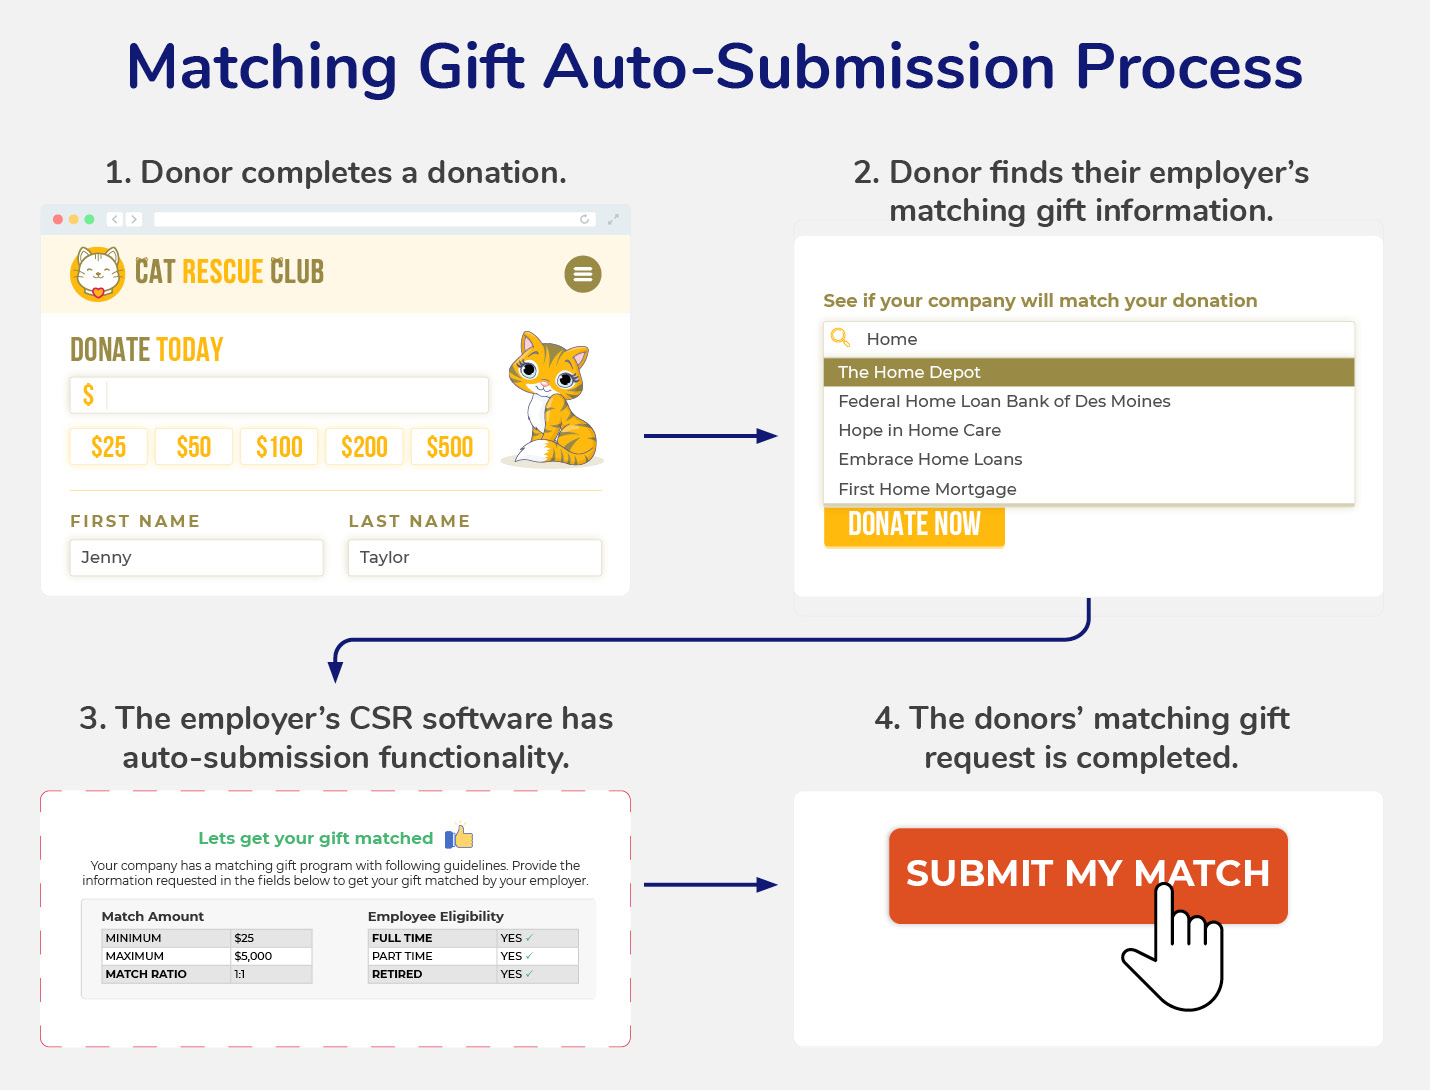 The image walks through the matching gift auto-submission process, detailed below.